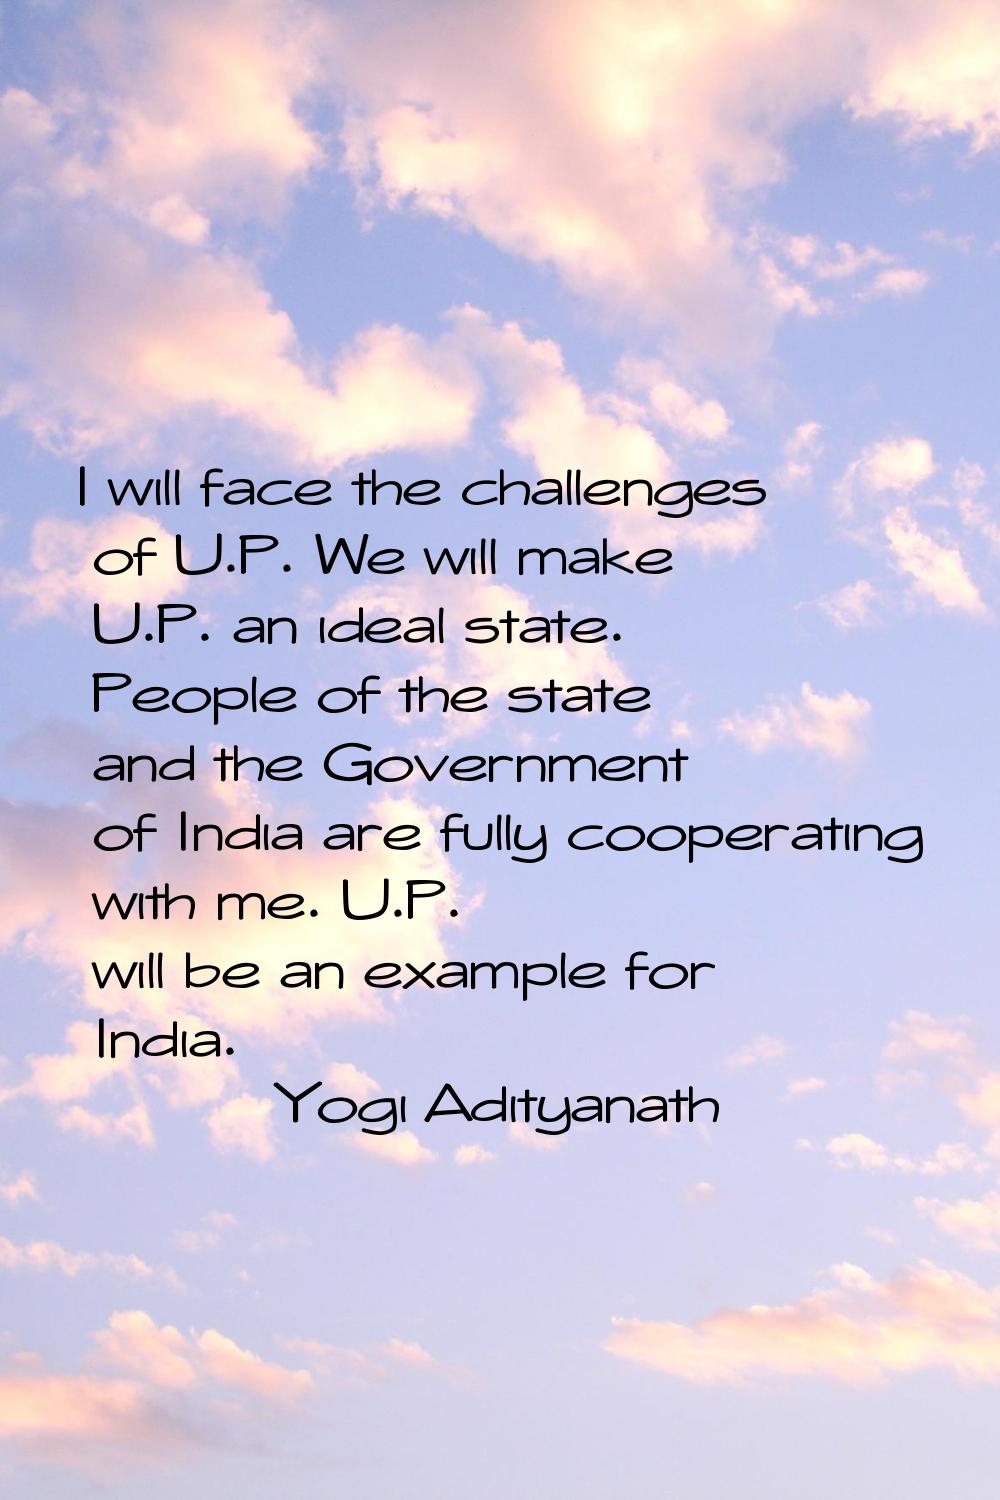 I will face the challenges of U.P. We will make U.P. an ideal state. People of the state and the Go